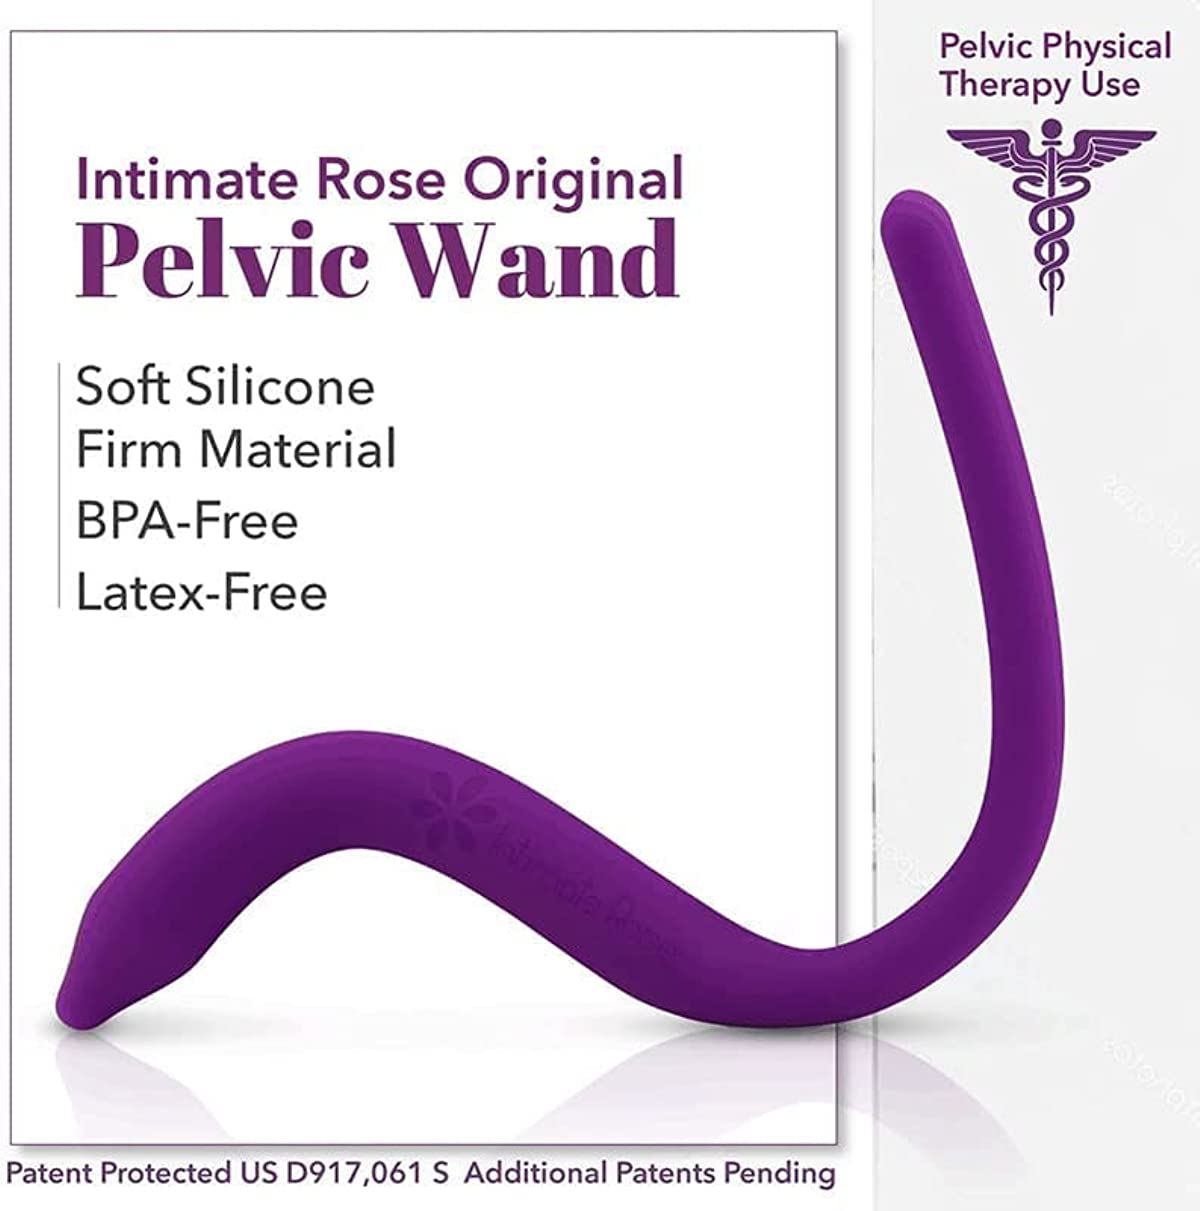 IntimateRose Pelvic Wand Trigger Point & Tender Point Release for Pelvic Floor Muscles - Pelvic Physical Therapy Use - Men & Women